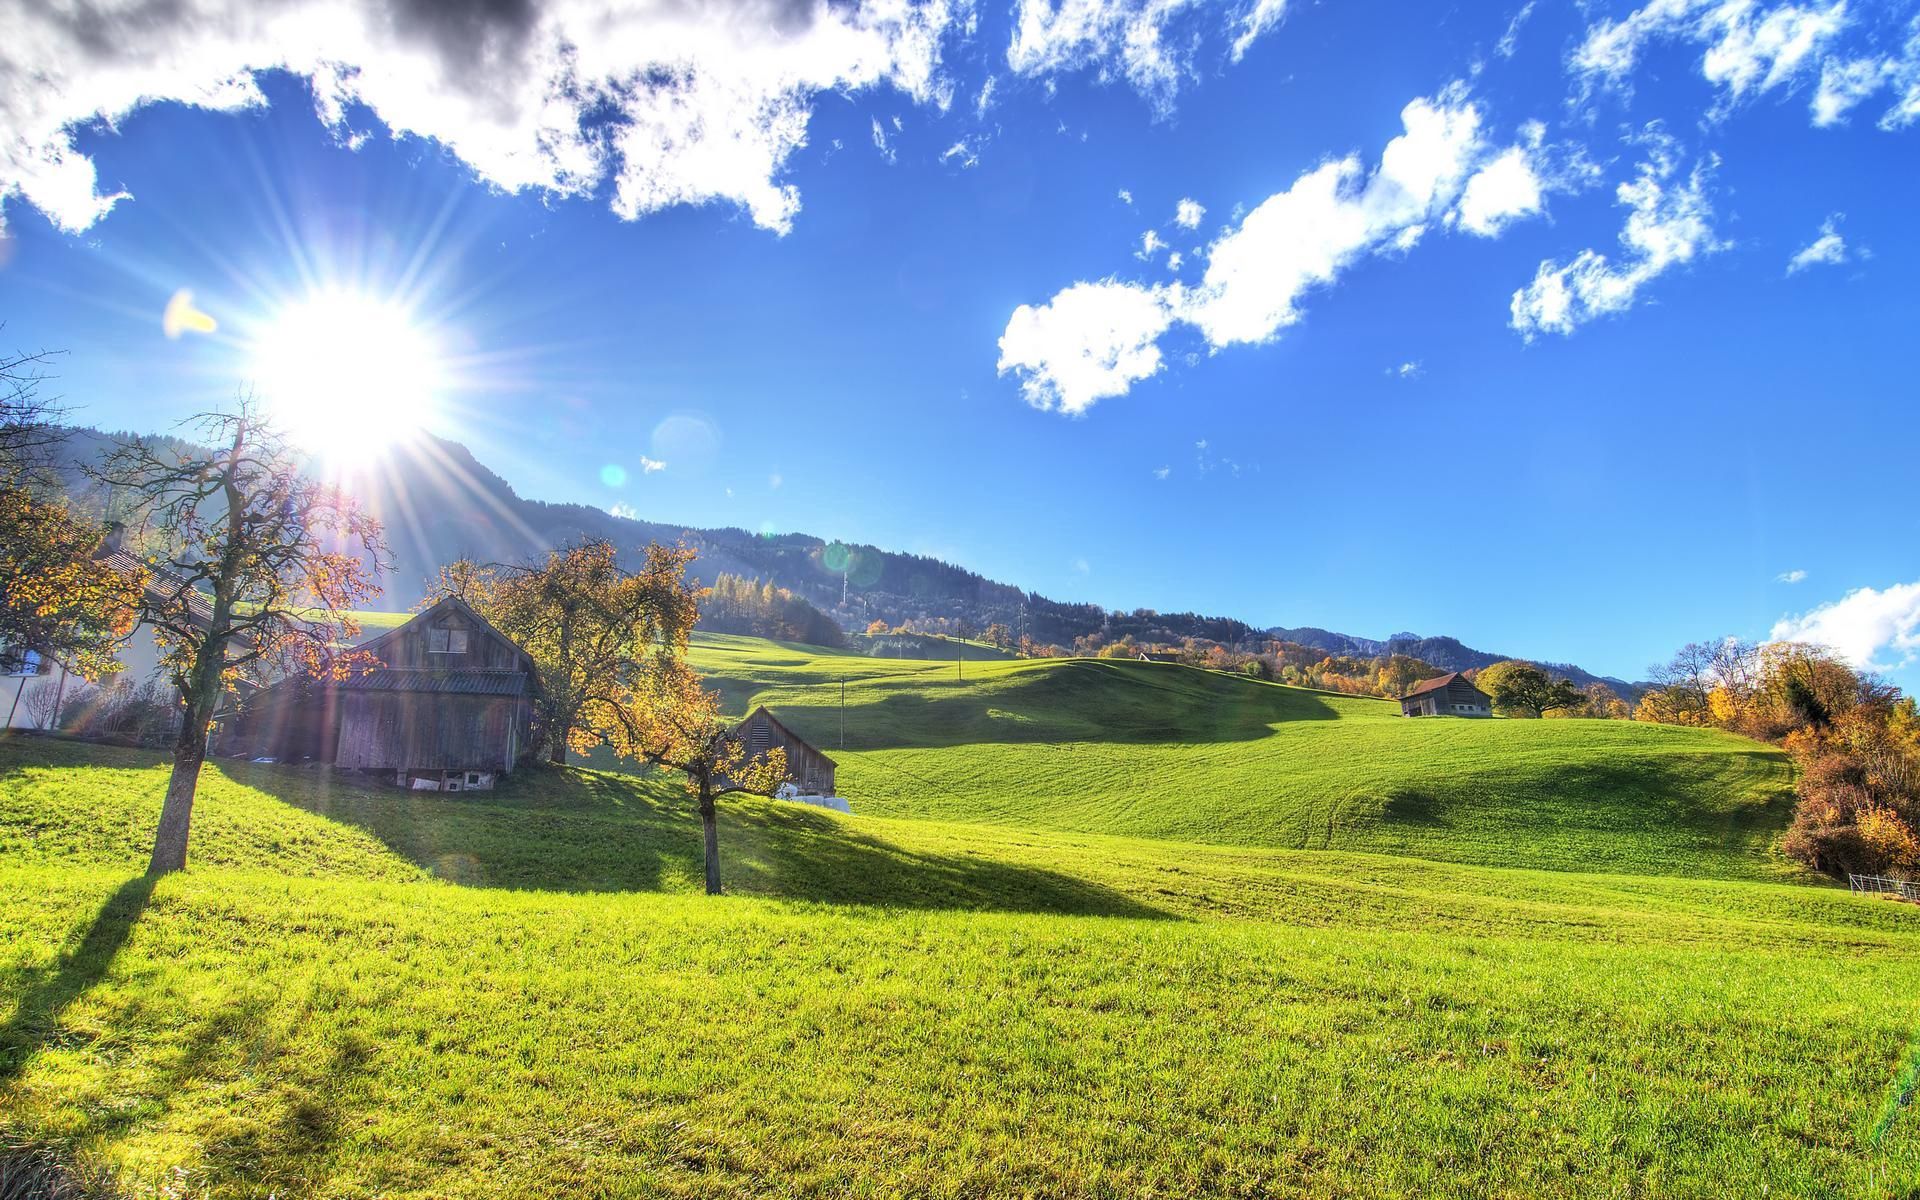 shine, nature, fields, autumn, sun, light, beams, rays, small house, lodge, lawn, heat, warmth, slopes, lawns, indian summer